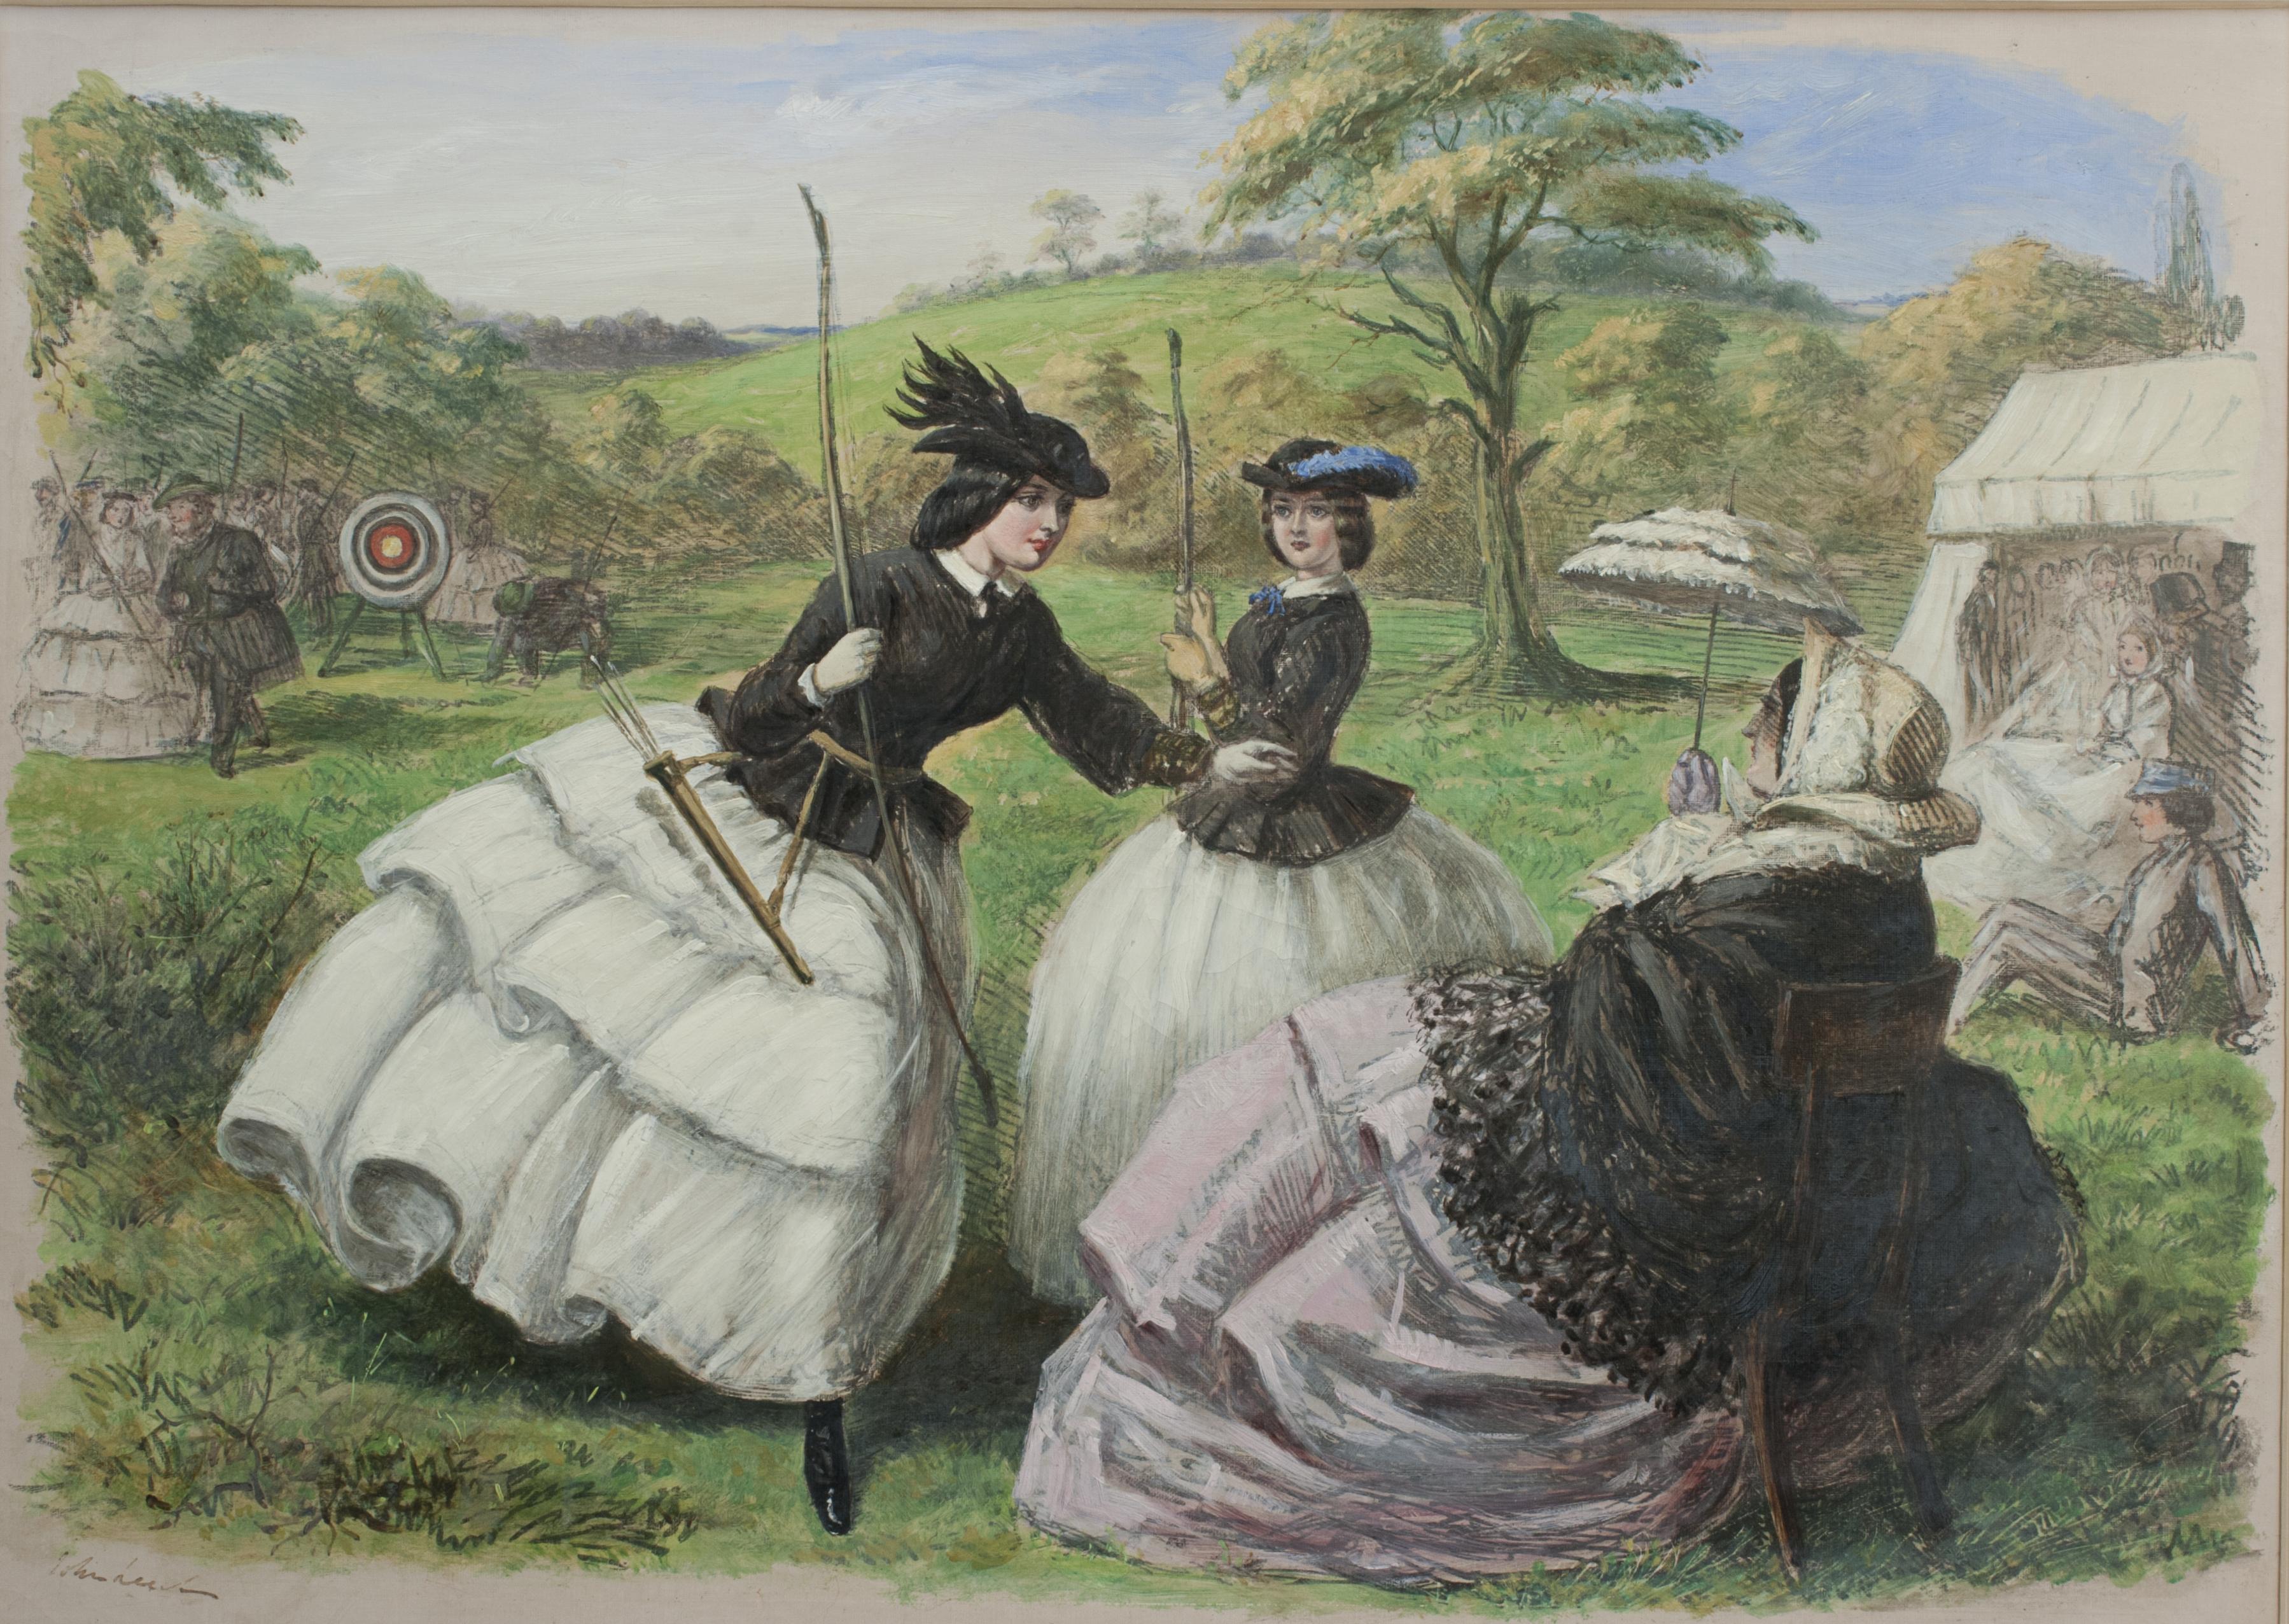 British Original Archery Painting, The Fair, Toxopholites. For Sale